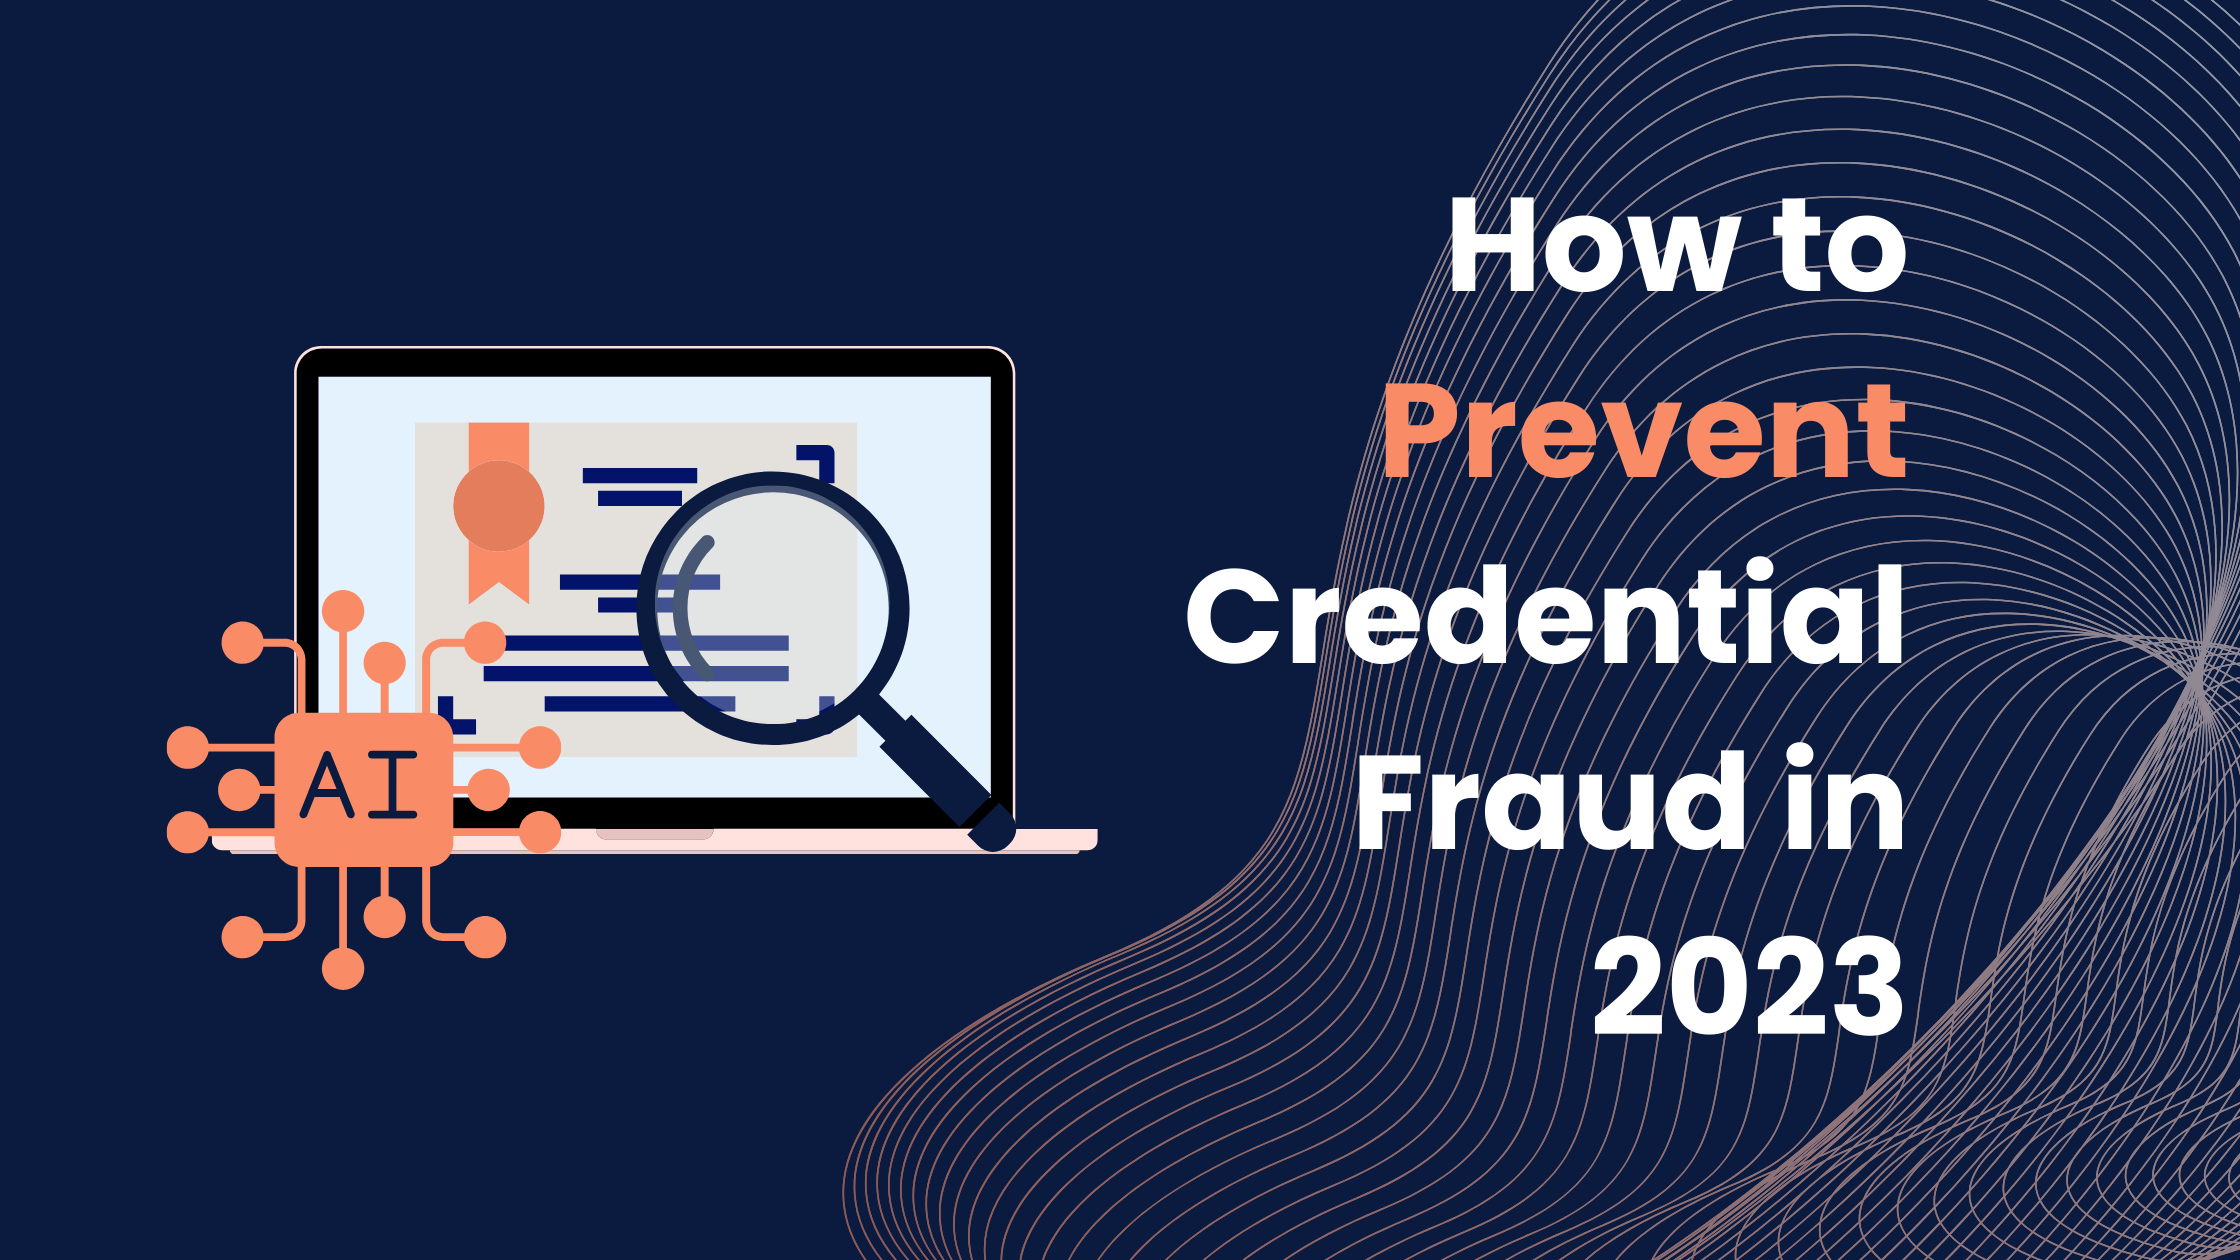 How to Prevent Credential Fraud in 2023